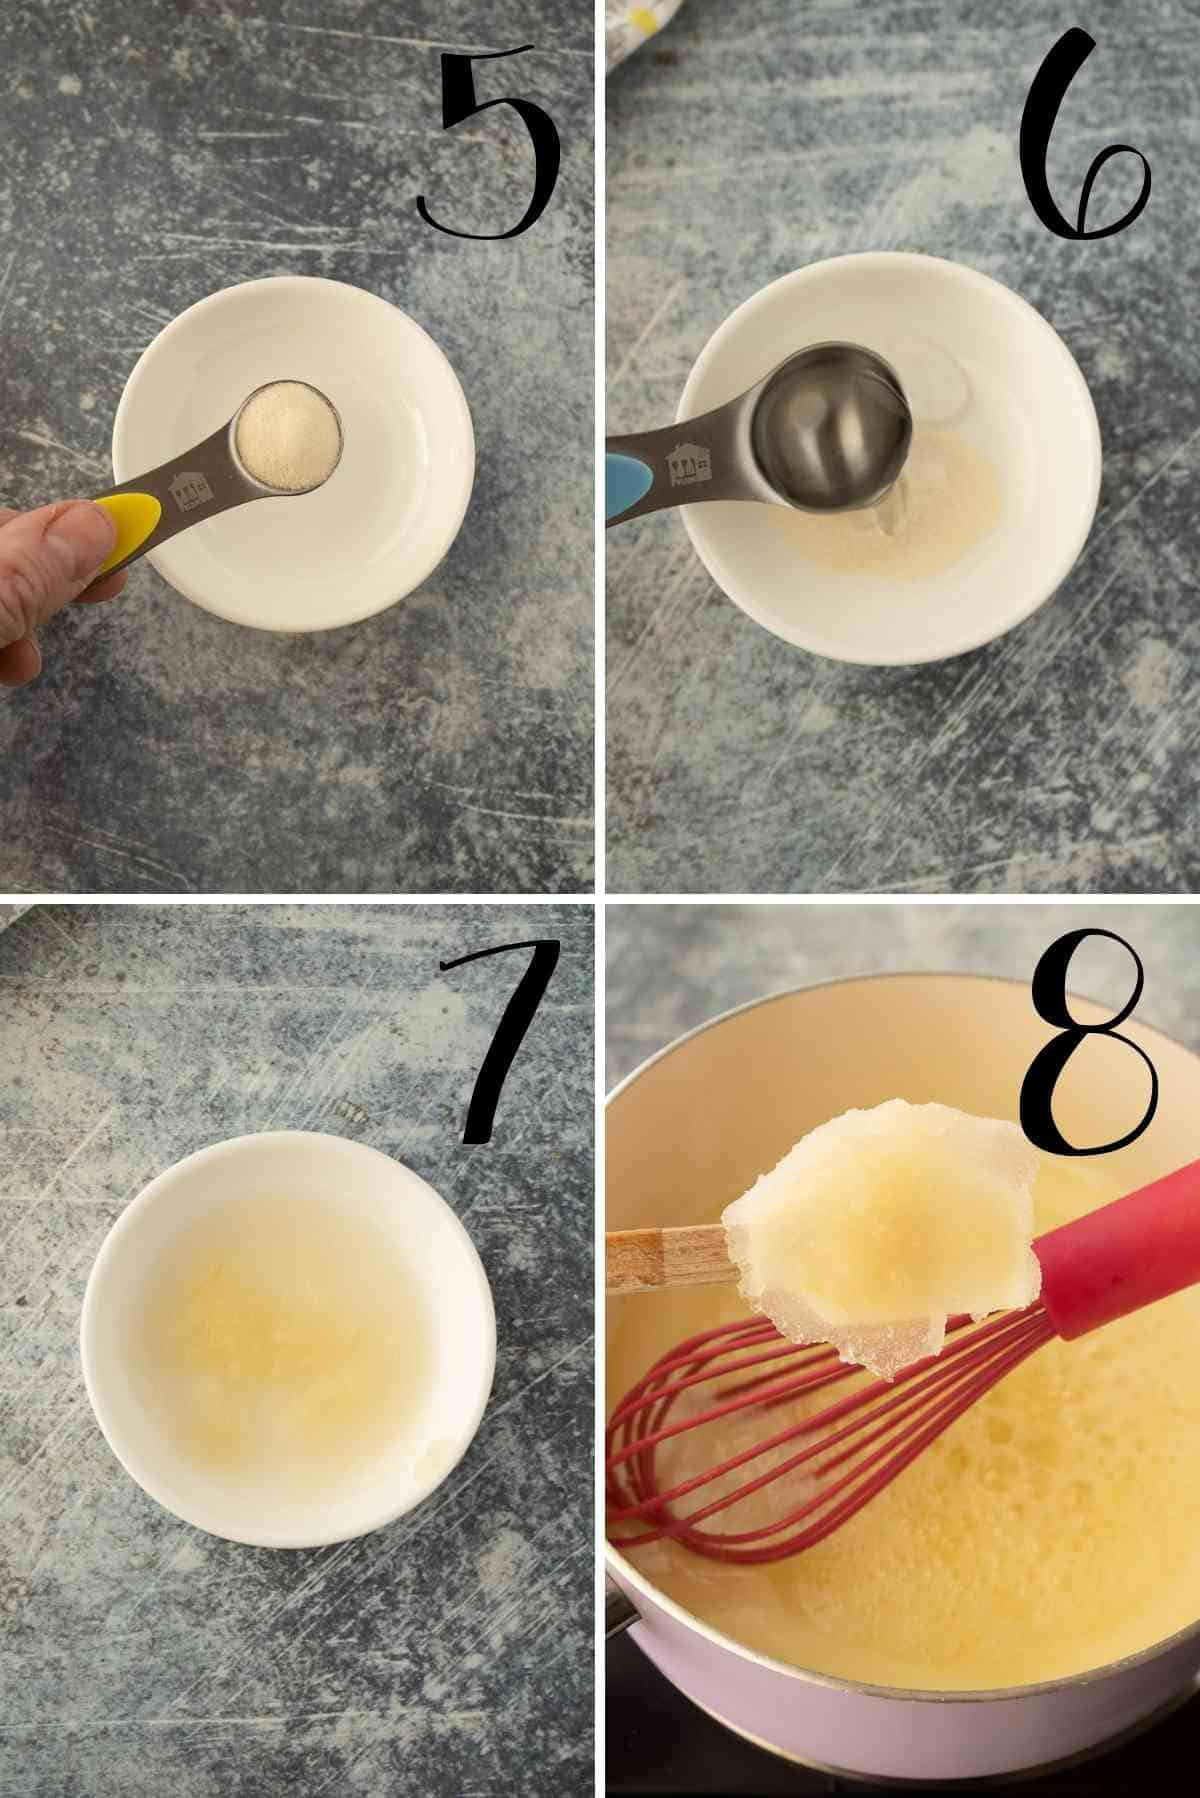 Soften unflavored gelatin and whisk it in the boiling contents in the pot.